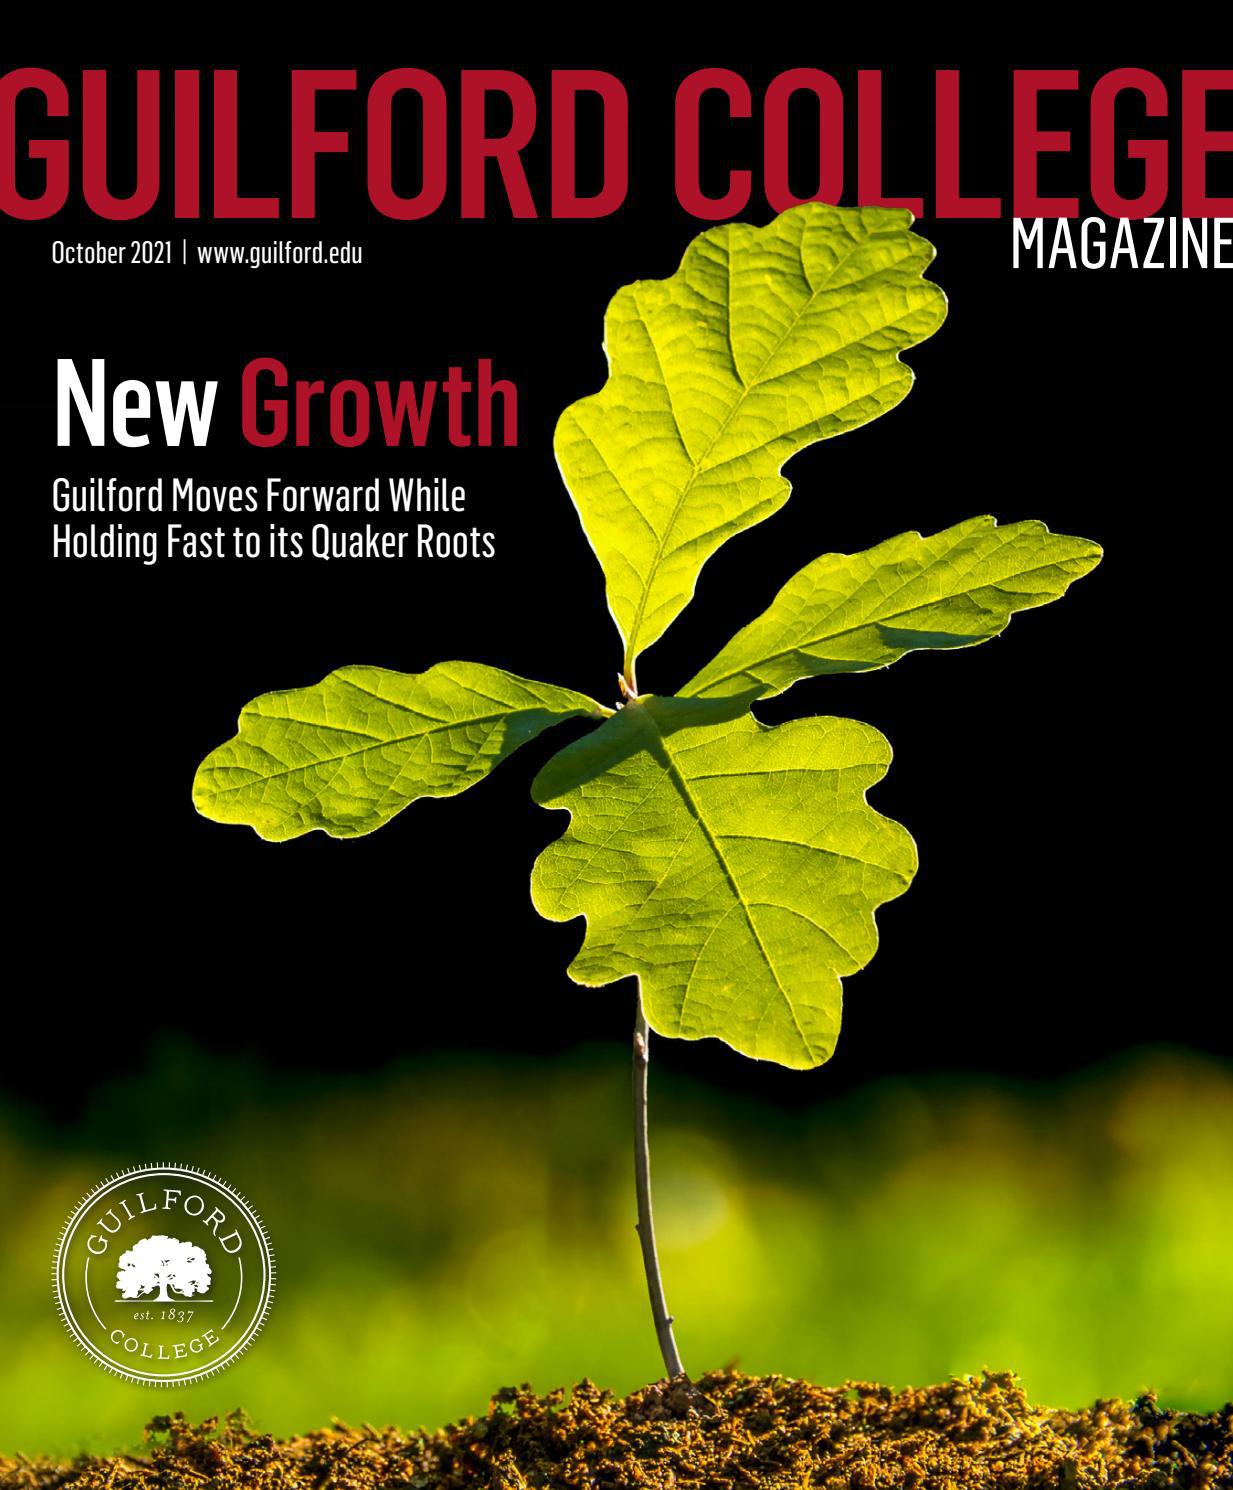 Updated October 2021 Guilford College Magazine